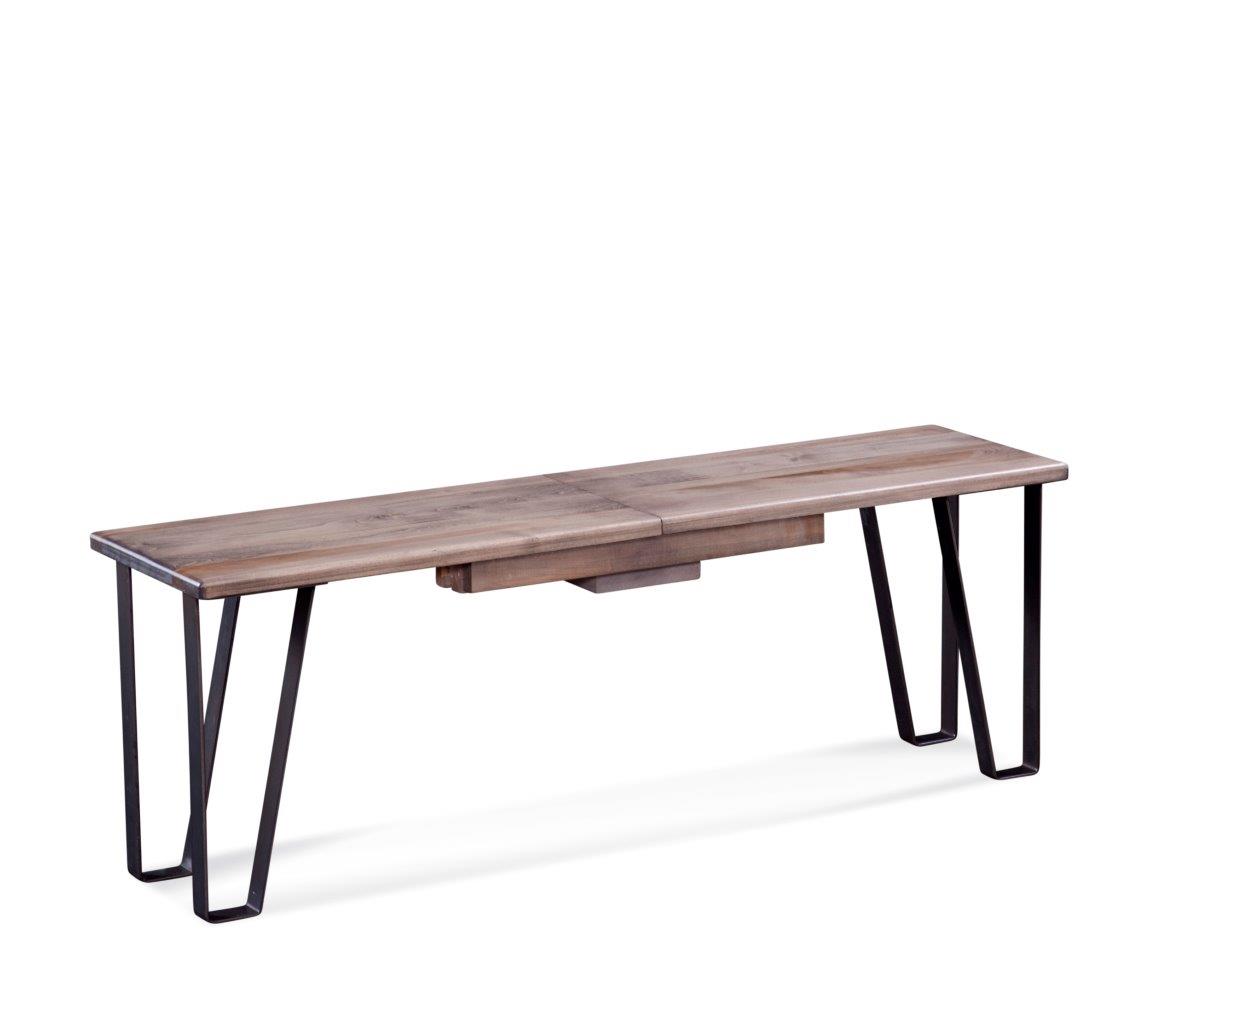 48" Gray Ash Raw Edge Maple And Black Steel Bench